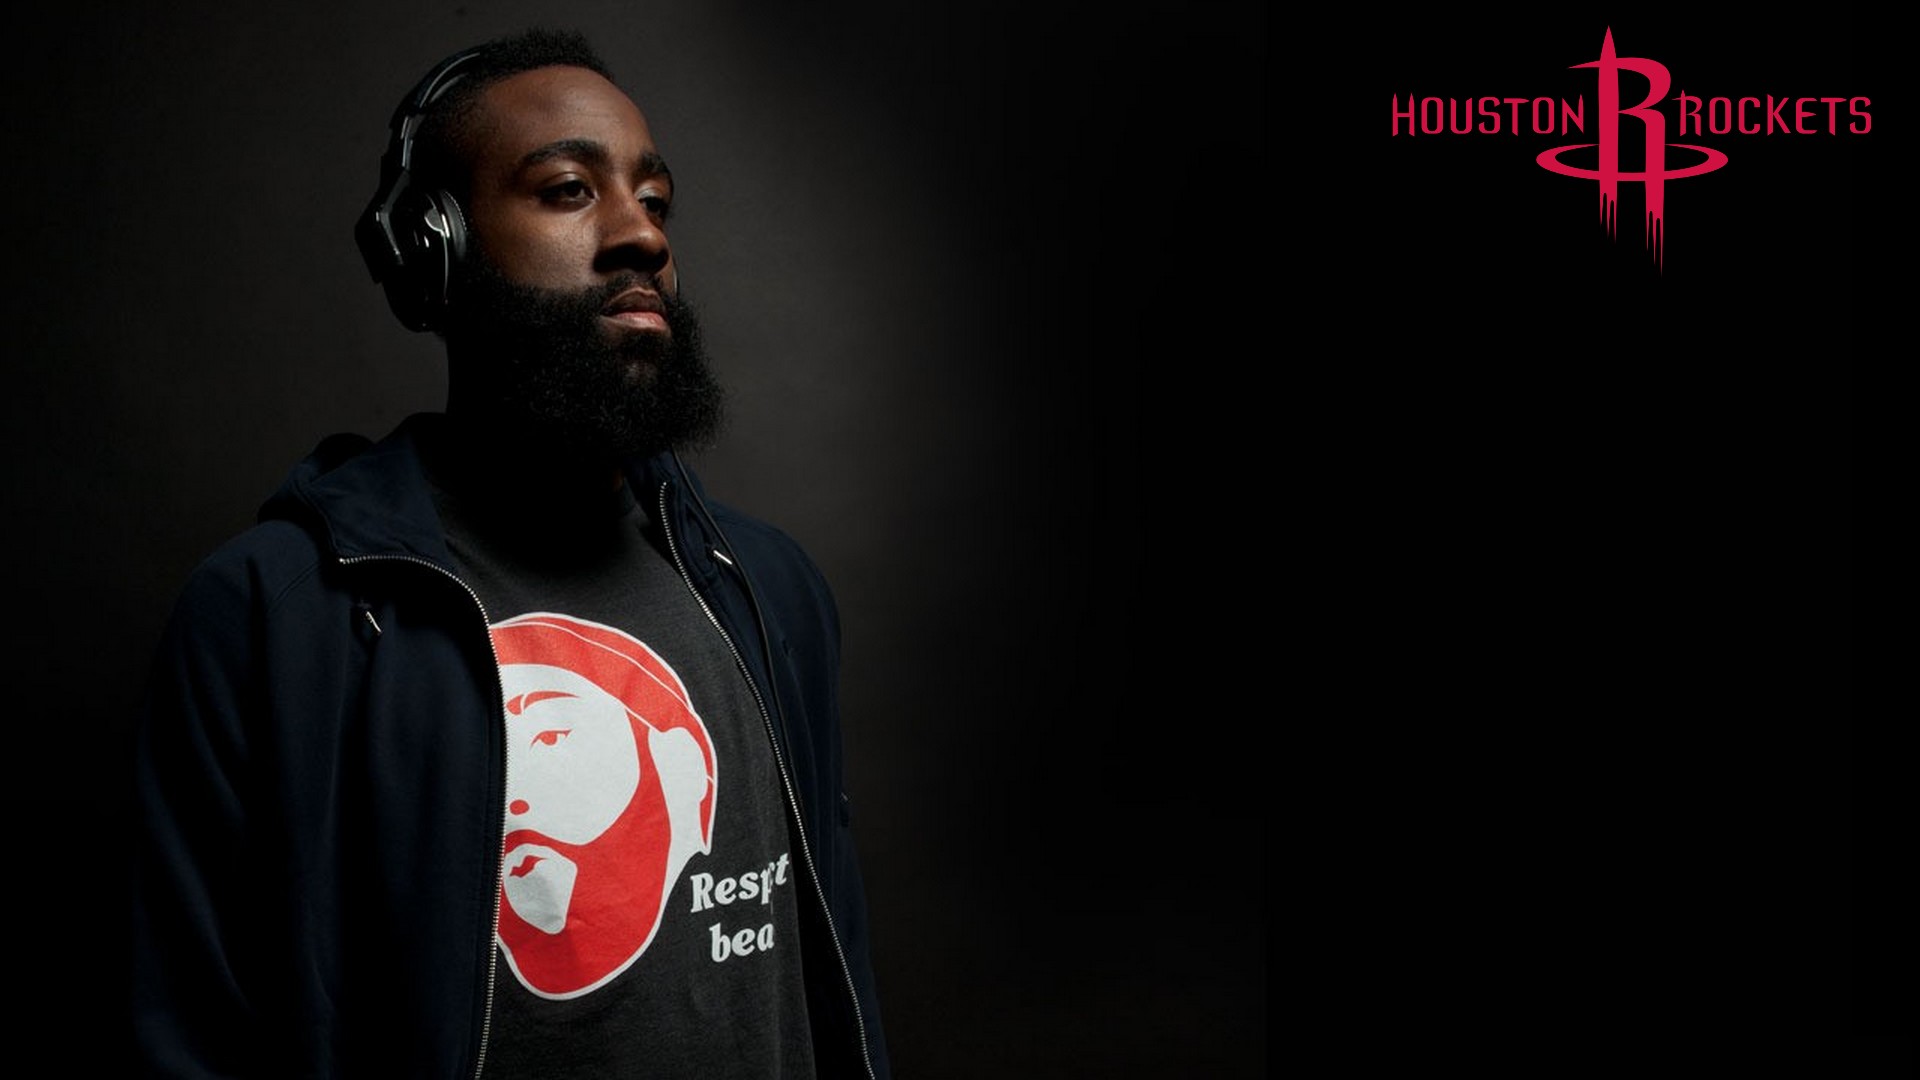 James Harden For Mac Wallpaper with image dimensions 1920x1080 pixel. You can make this wallpaper for your Desktop Computer Backgrounds, Windows or Mac Screensavers, iPhone Lock screen, Tablet or Android and another Mobile Phone device